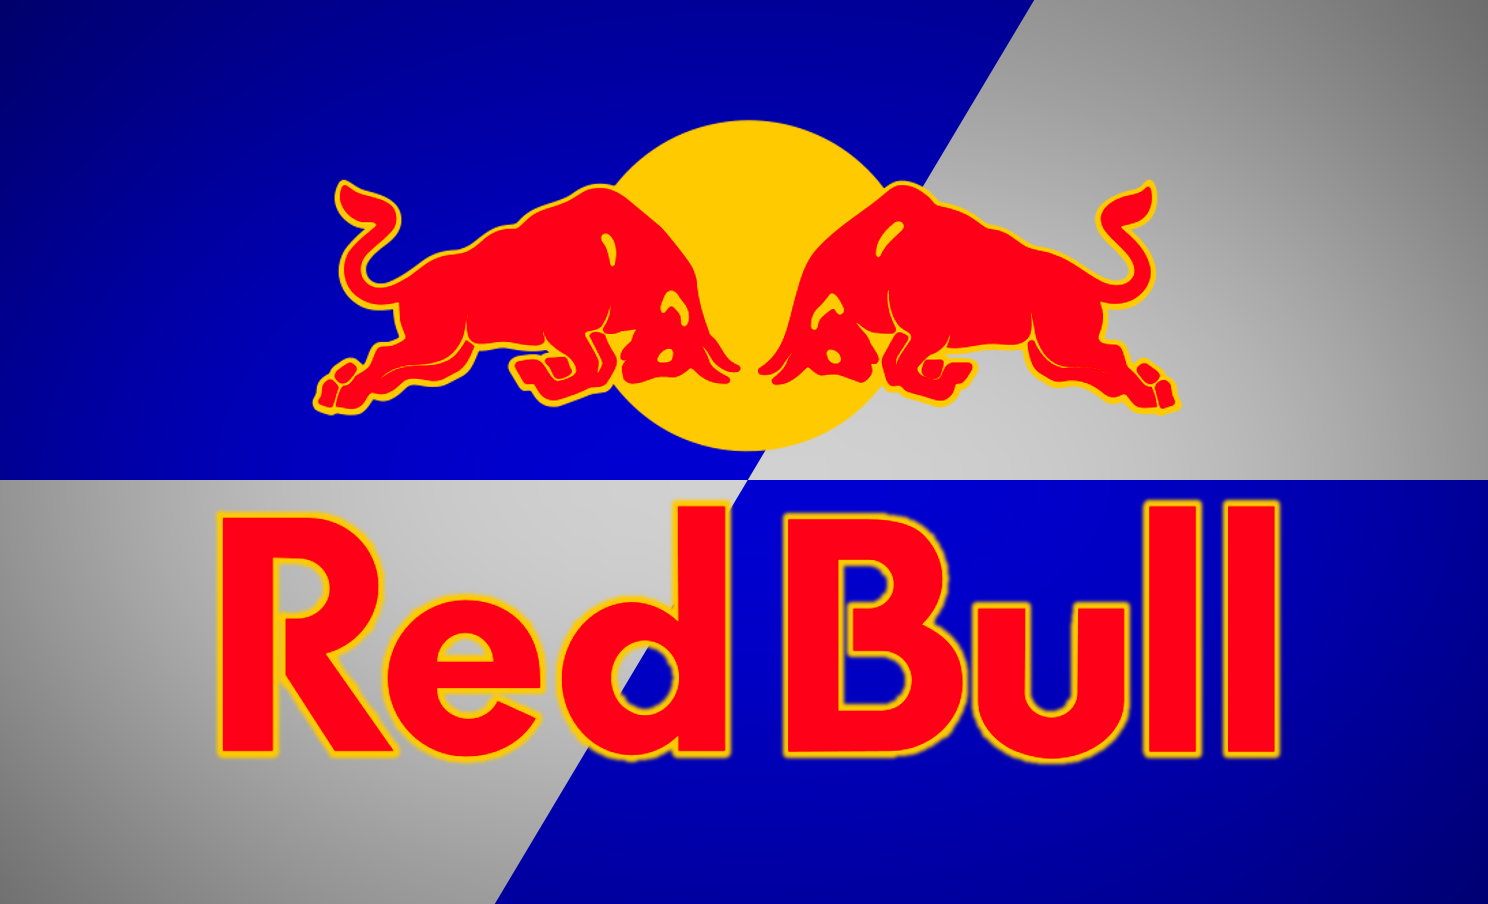 Red Bull Logo, Red Bull Symbol, Meaning, History and Evolution